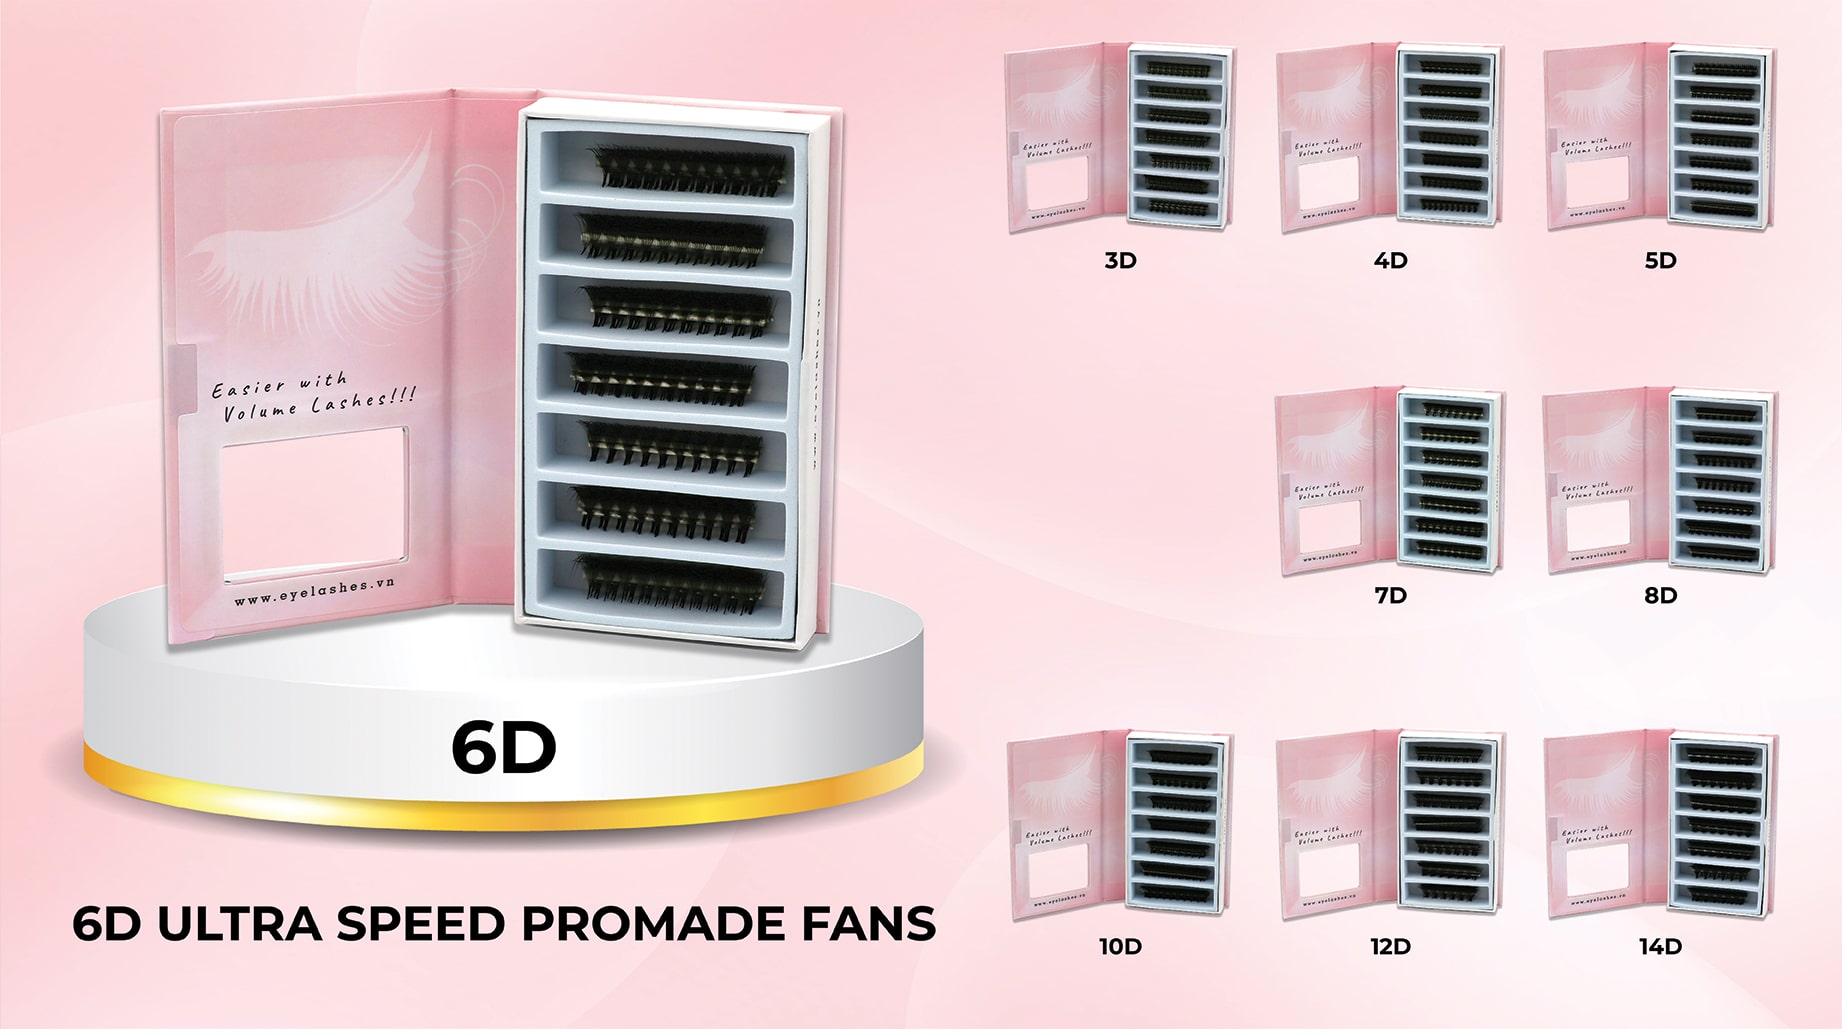 Ultra-Speed-6D-promade-fan-wholesale-eyelash-supplier-VNLASHES